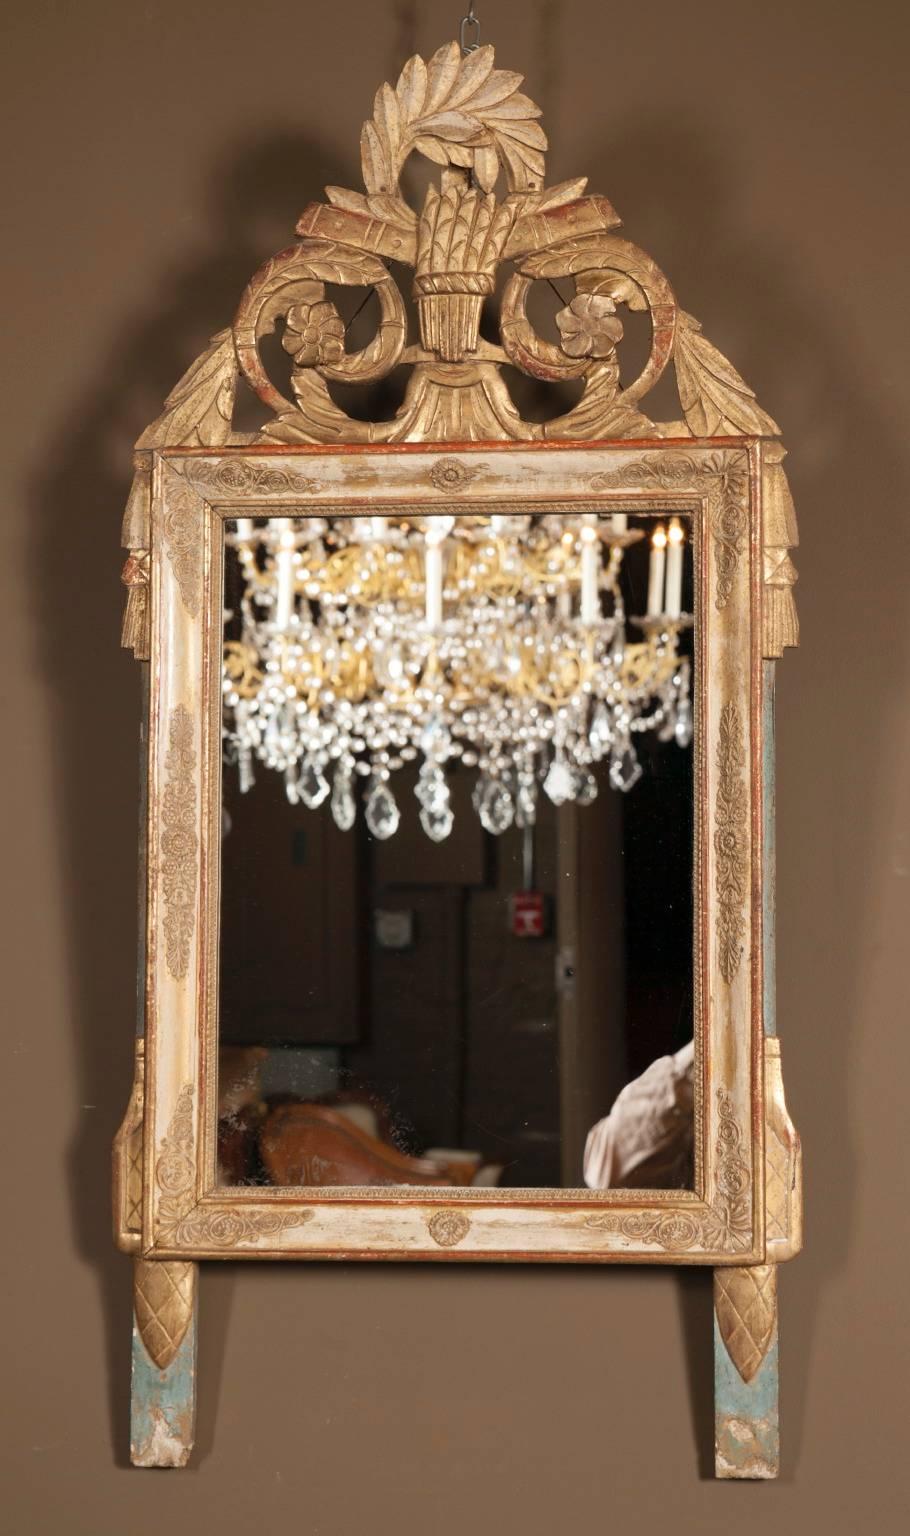 Beautifully crafted by hand in the early 19th century, this antique mirror is made of gold leaf laid over a beautiful series of carvings in a wooden frame. The frame of the mirror is embellished with various intricate swirls and designs. The bottom